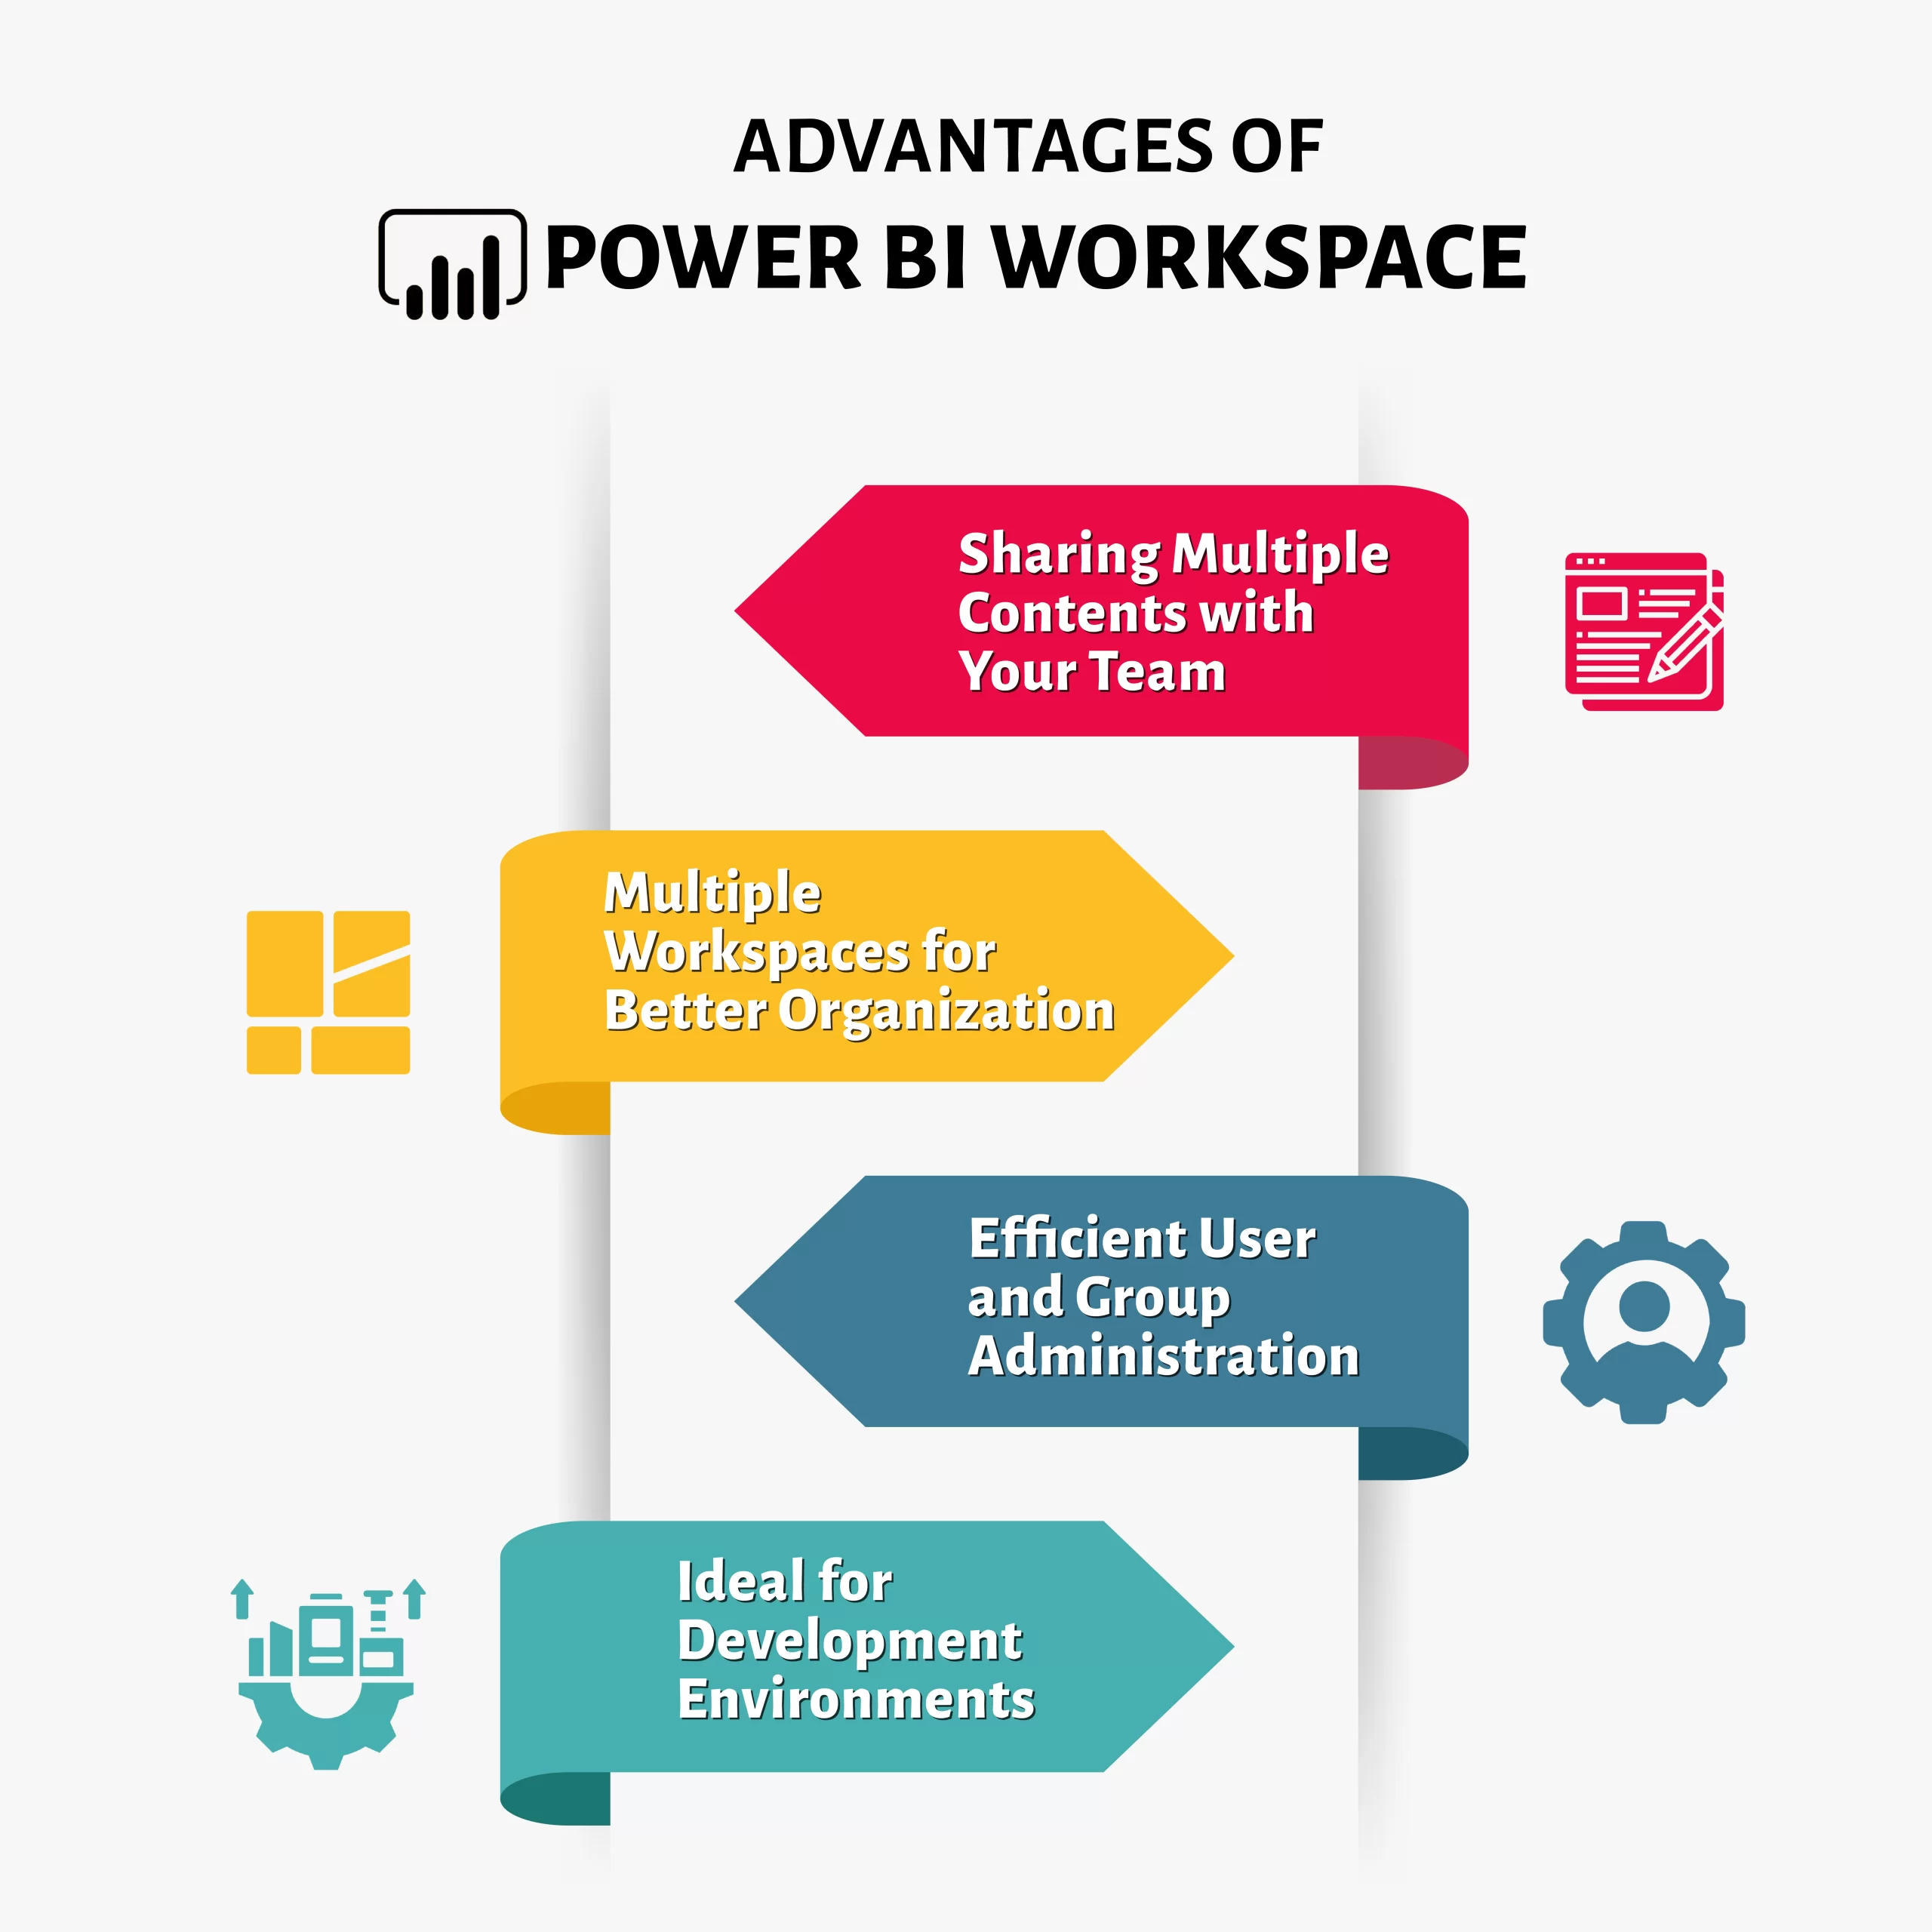 Advantages-of-Power-BI-Workspace-scaled